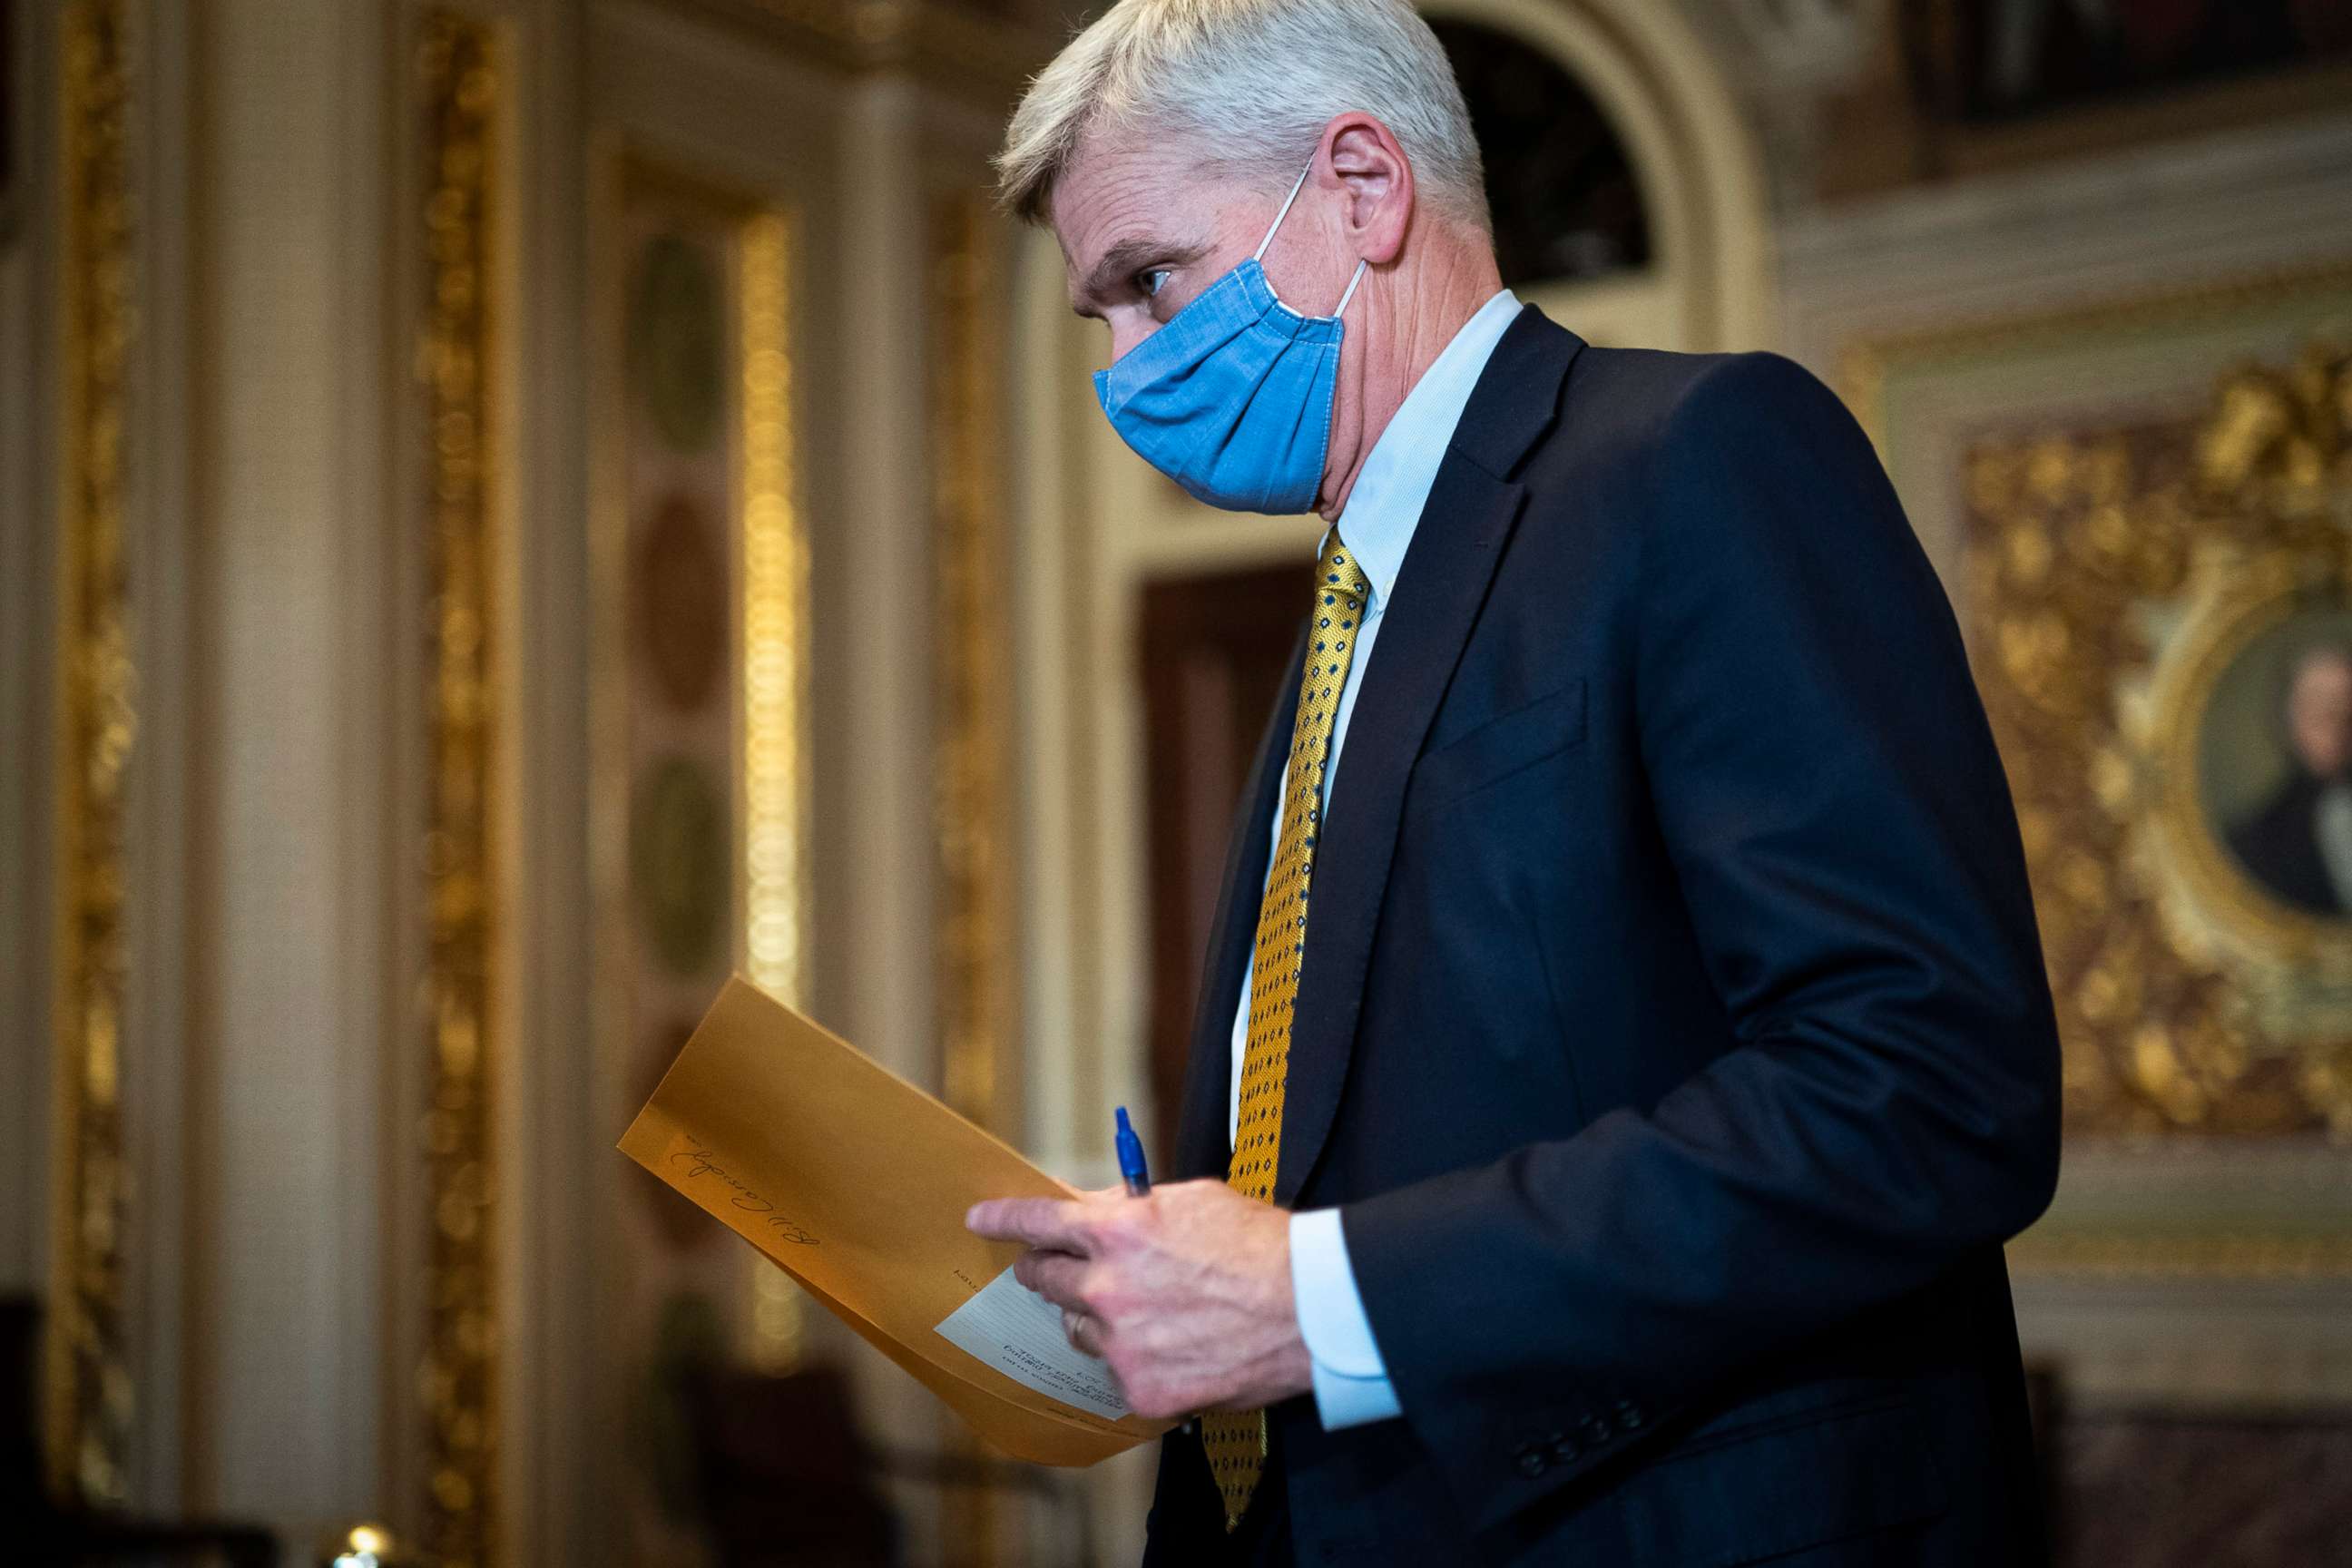 PHOTO: Sen. Bill Cassidy walks in the Senate Reception room on the fourth day of the Senate Impeachment trial for Trump on Capitol Hill, Feb 12, 2021, in Washington, D.C.